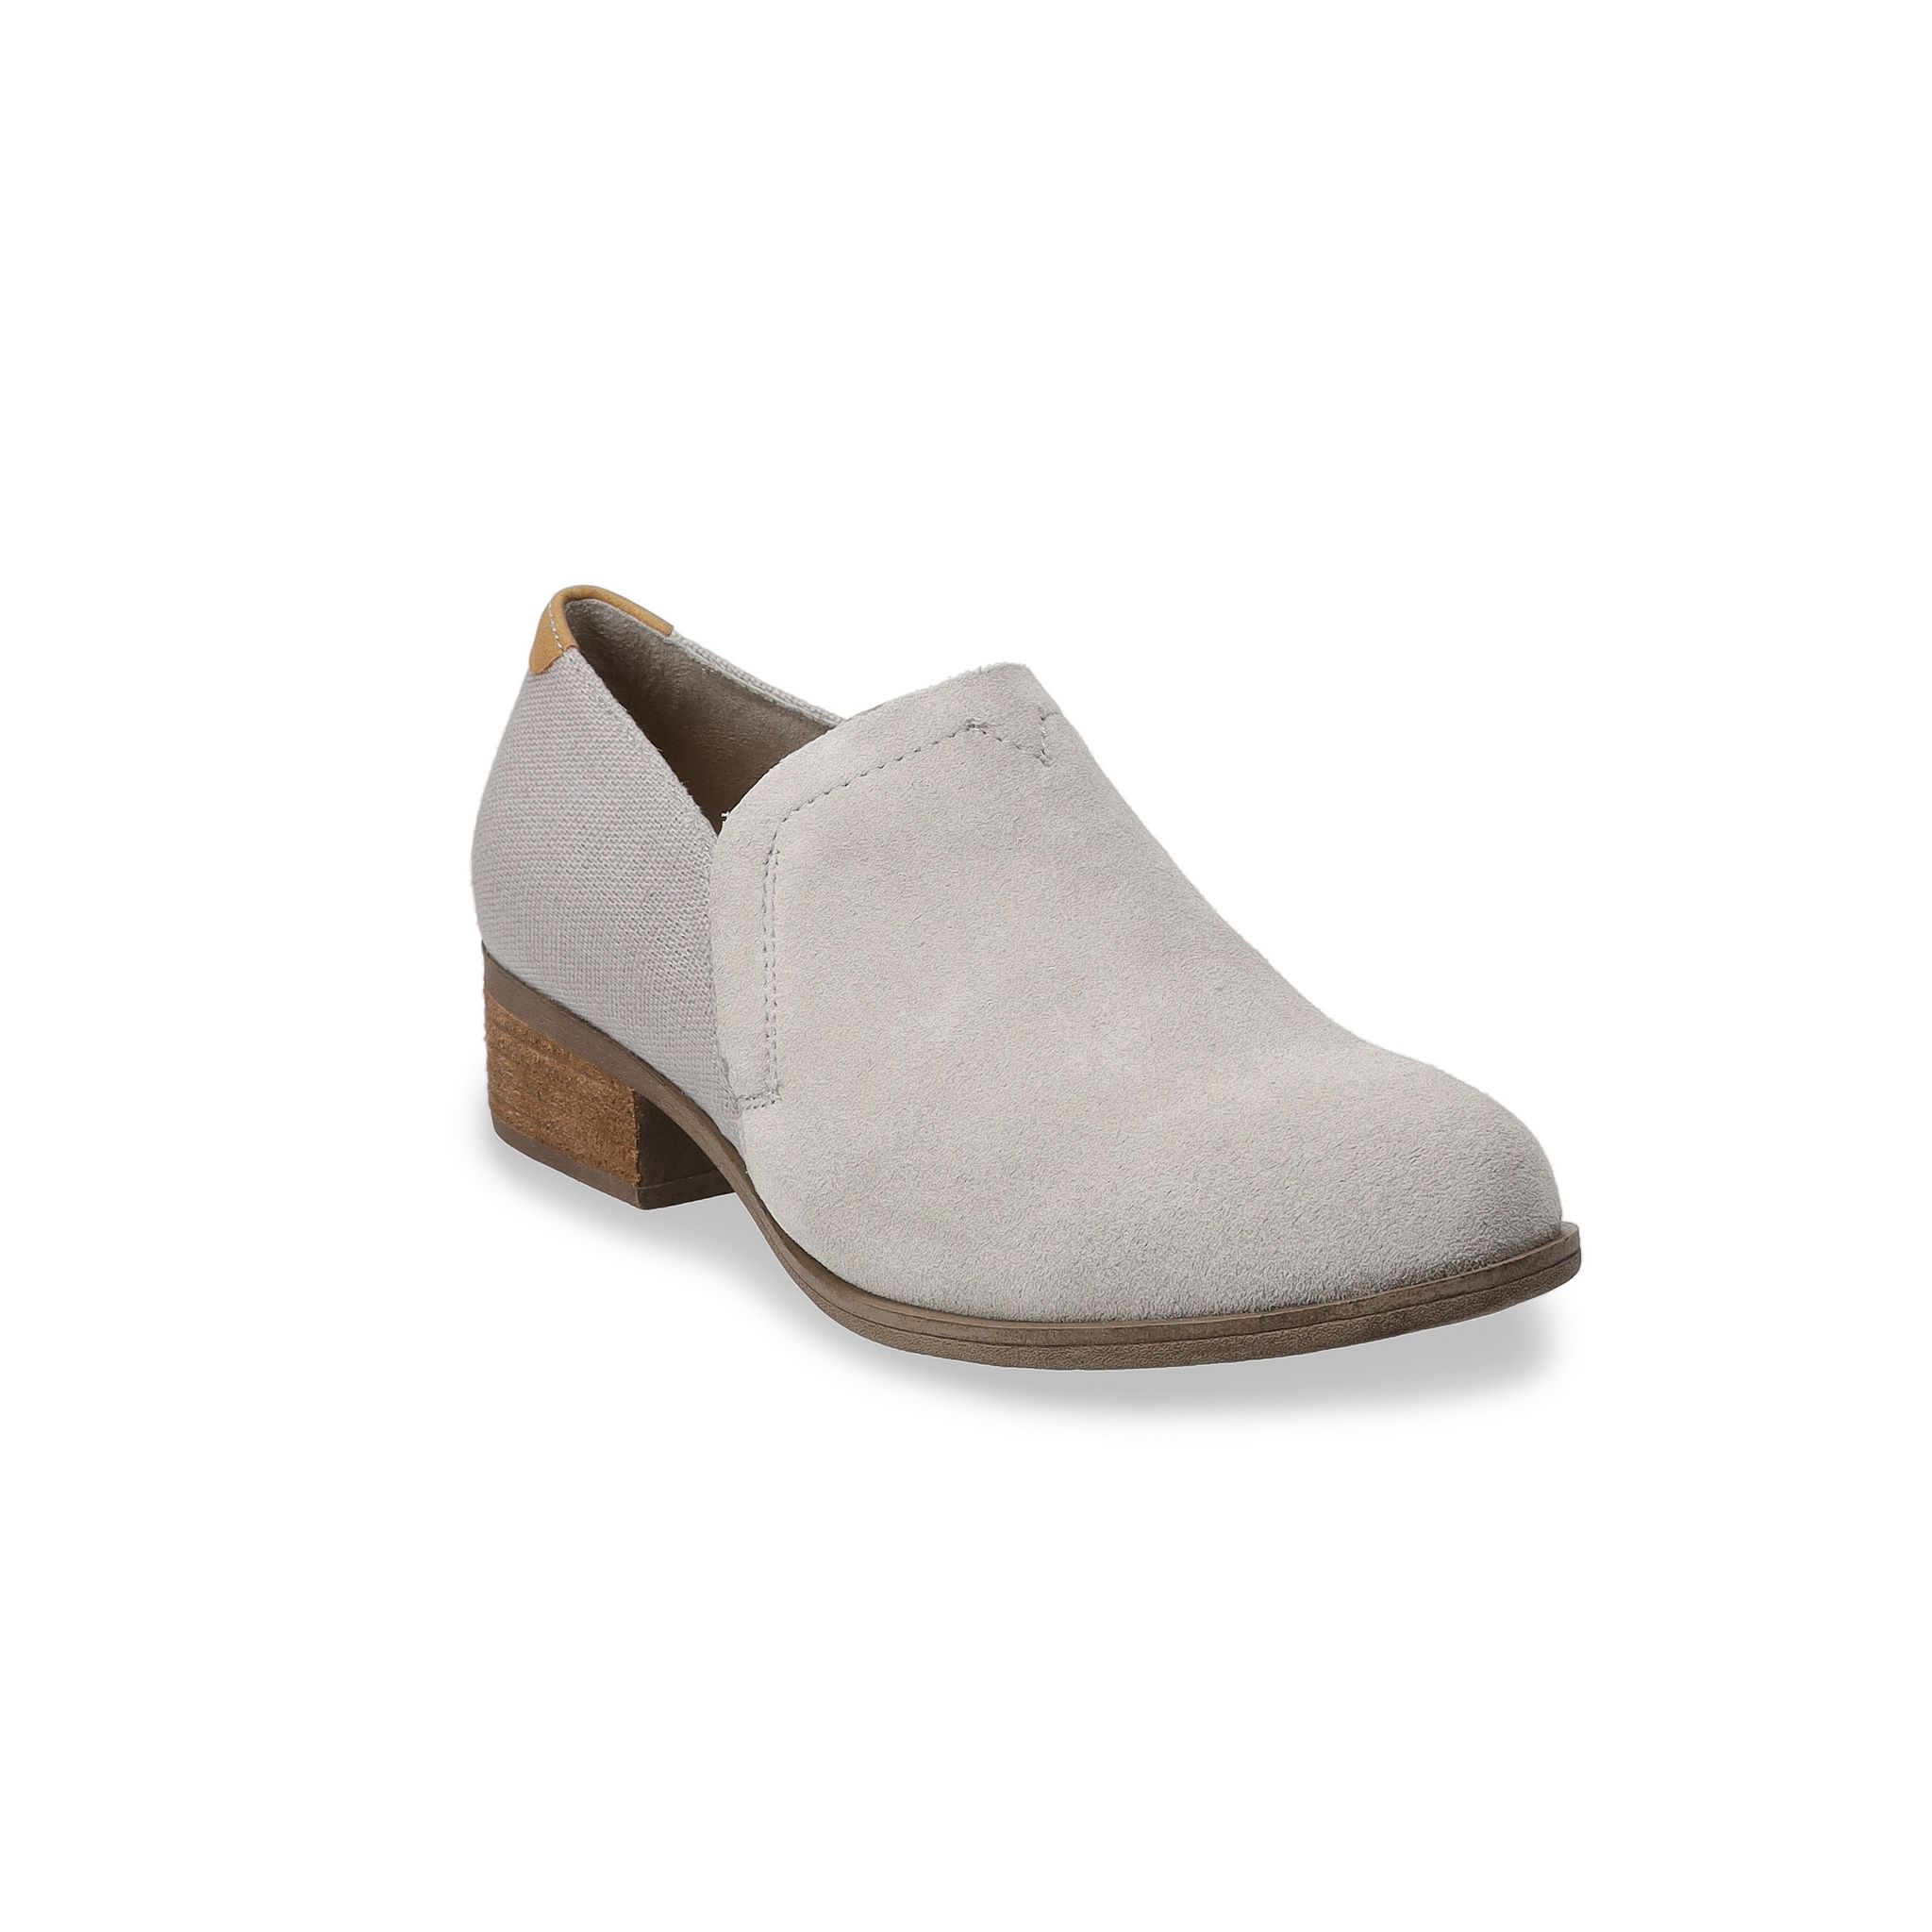 TOMS Shoes: Shop Casual Footwear For the Whole Family Kohl's